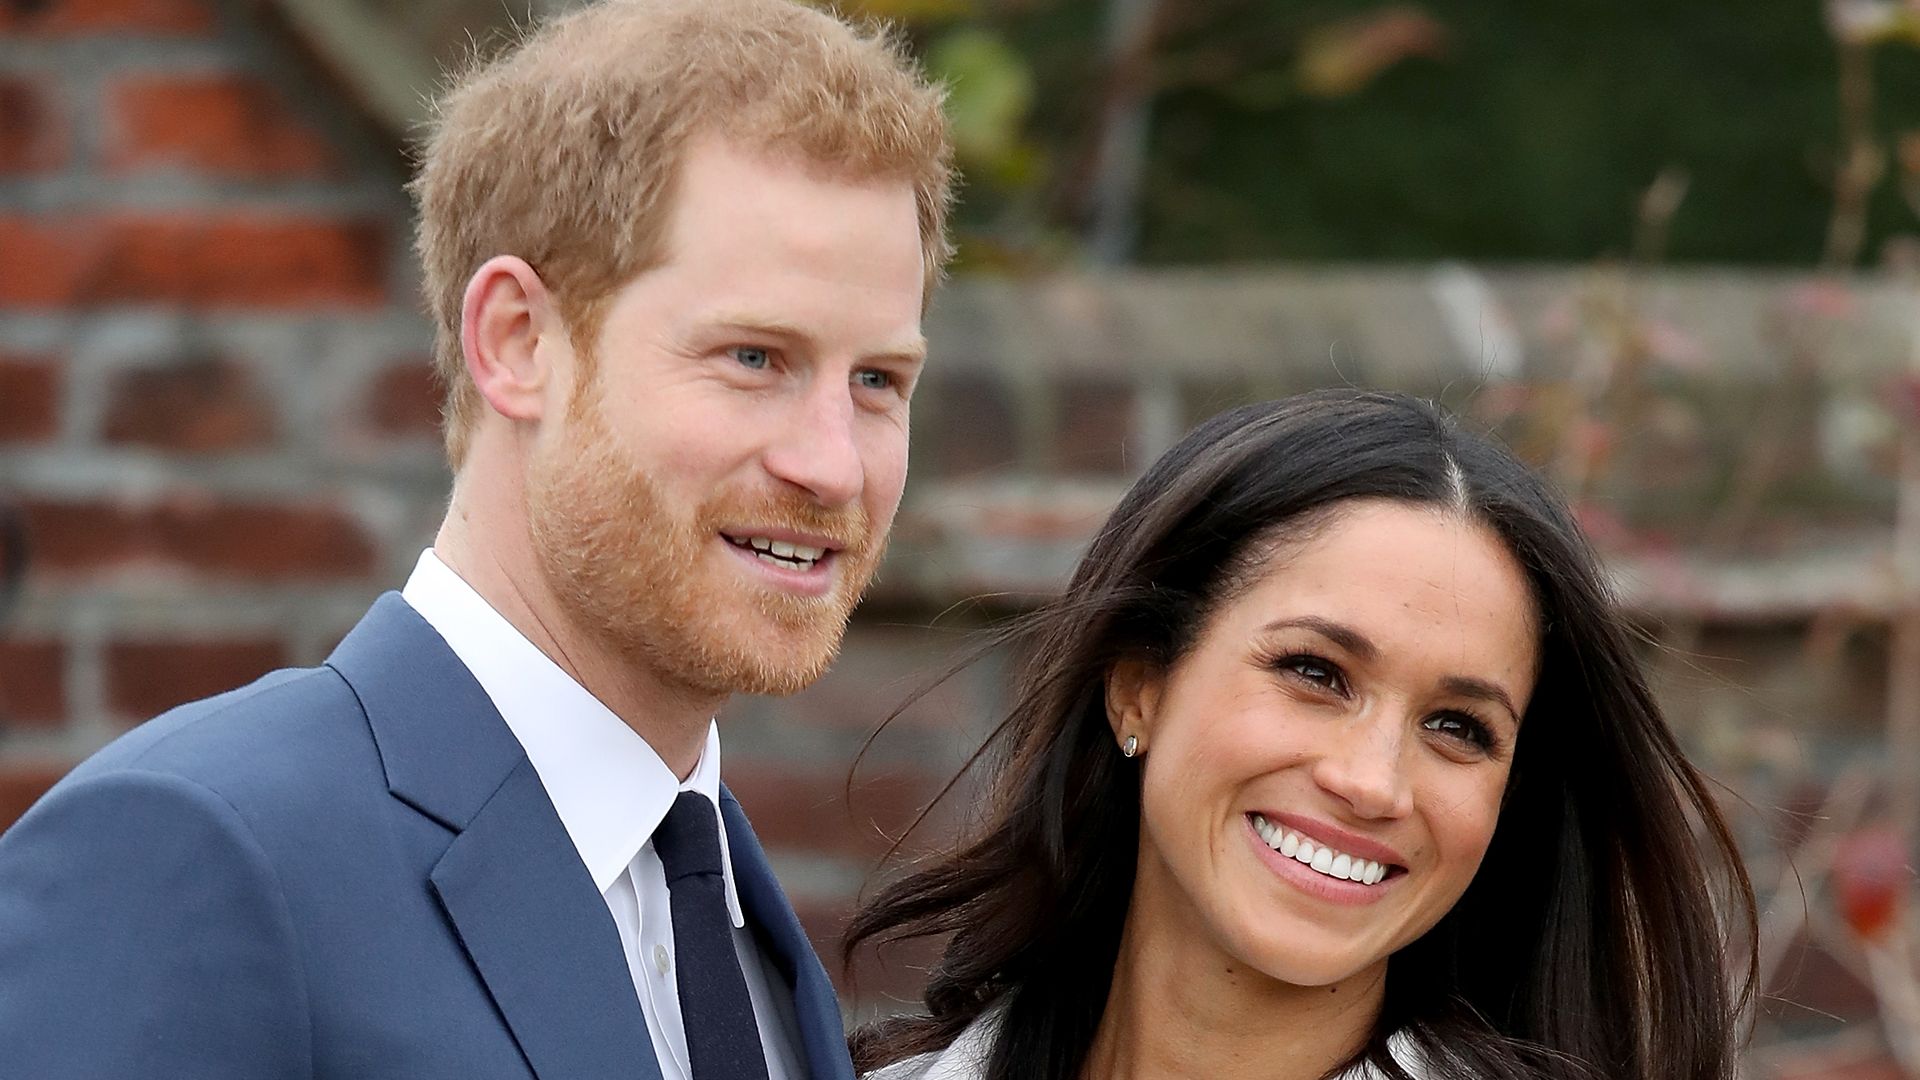 Prince Harry and Meghan Markle during an official photocall to announce their engagement at Kensington Palace in 2017